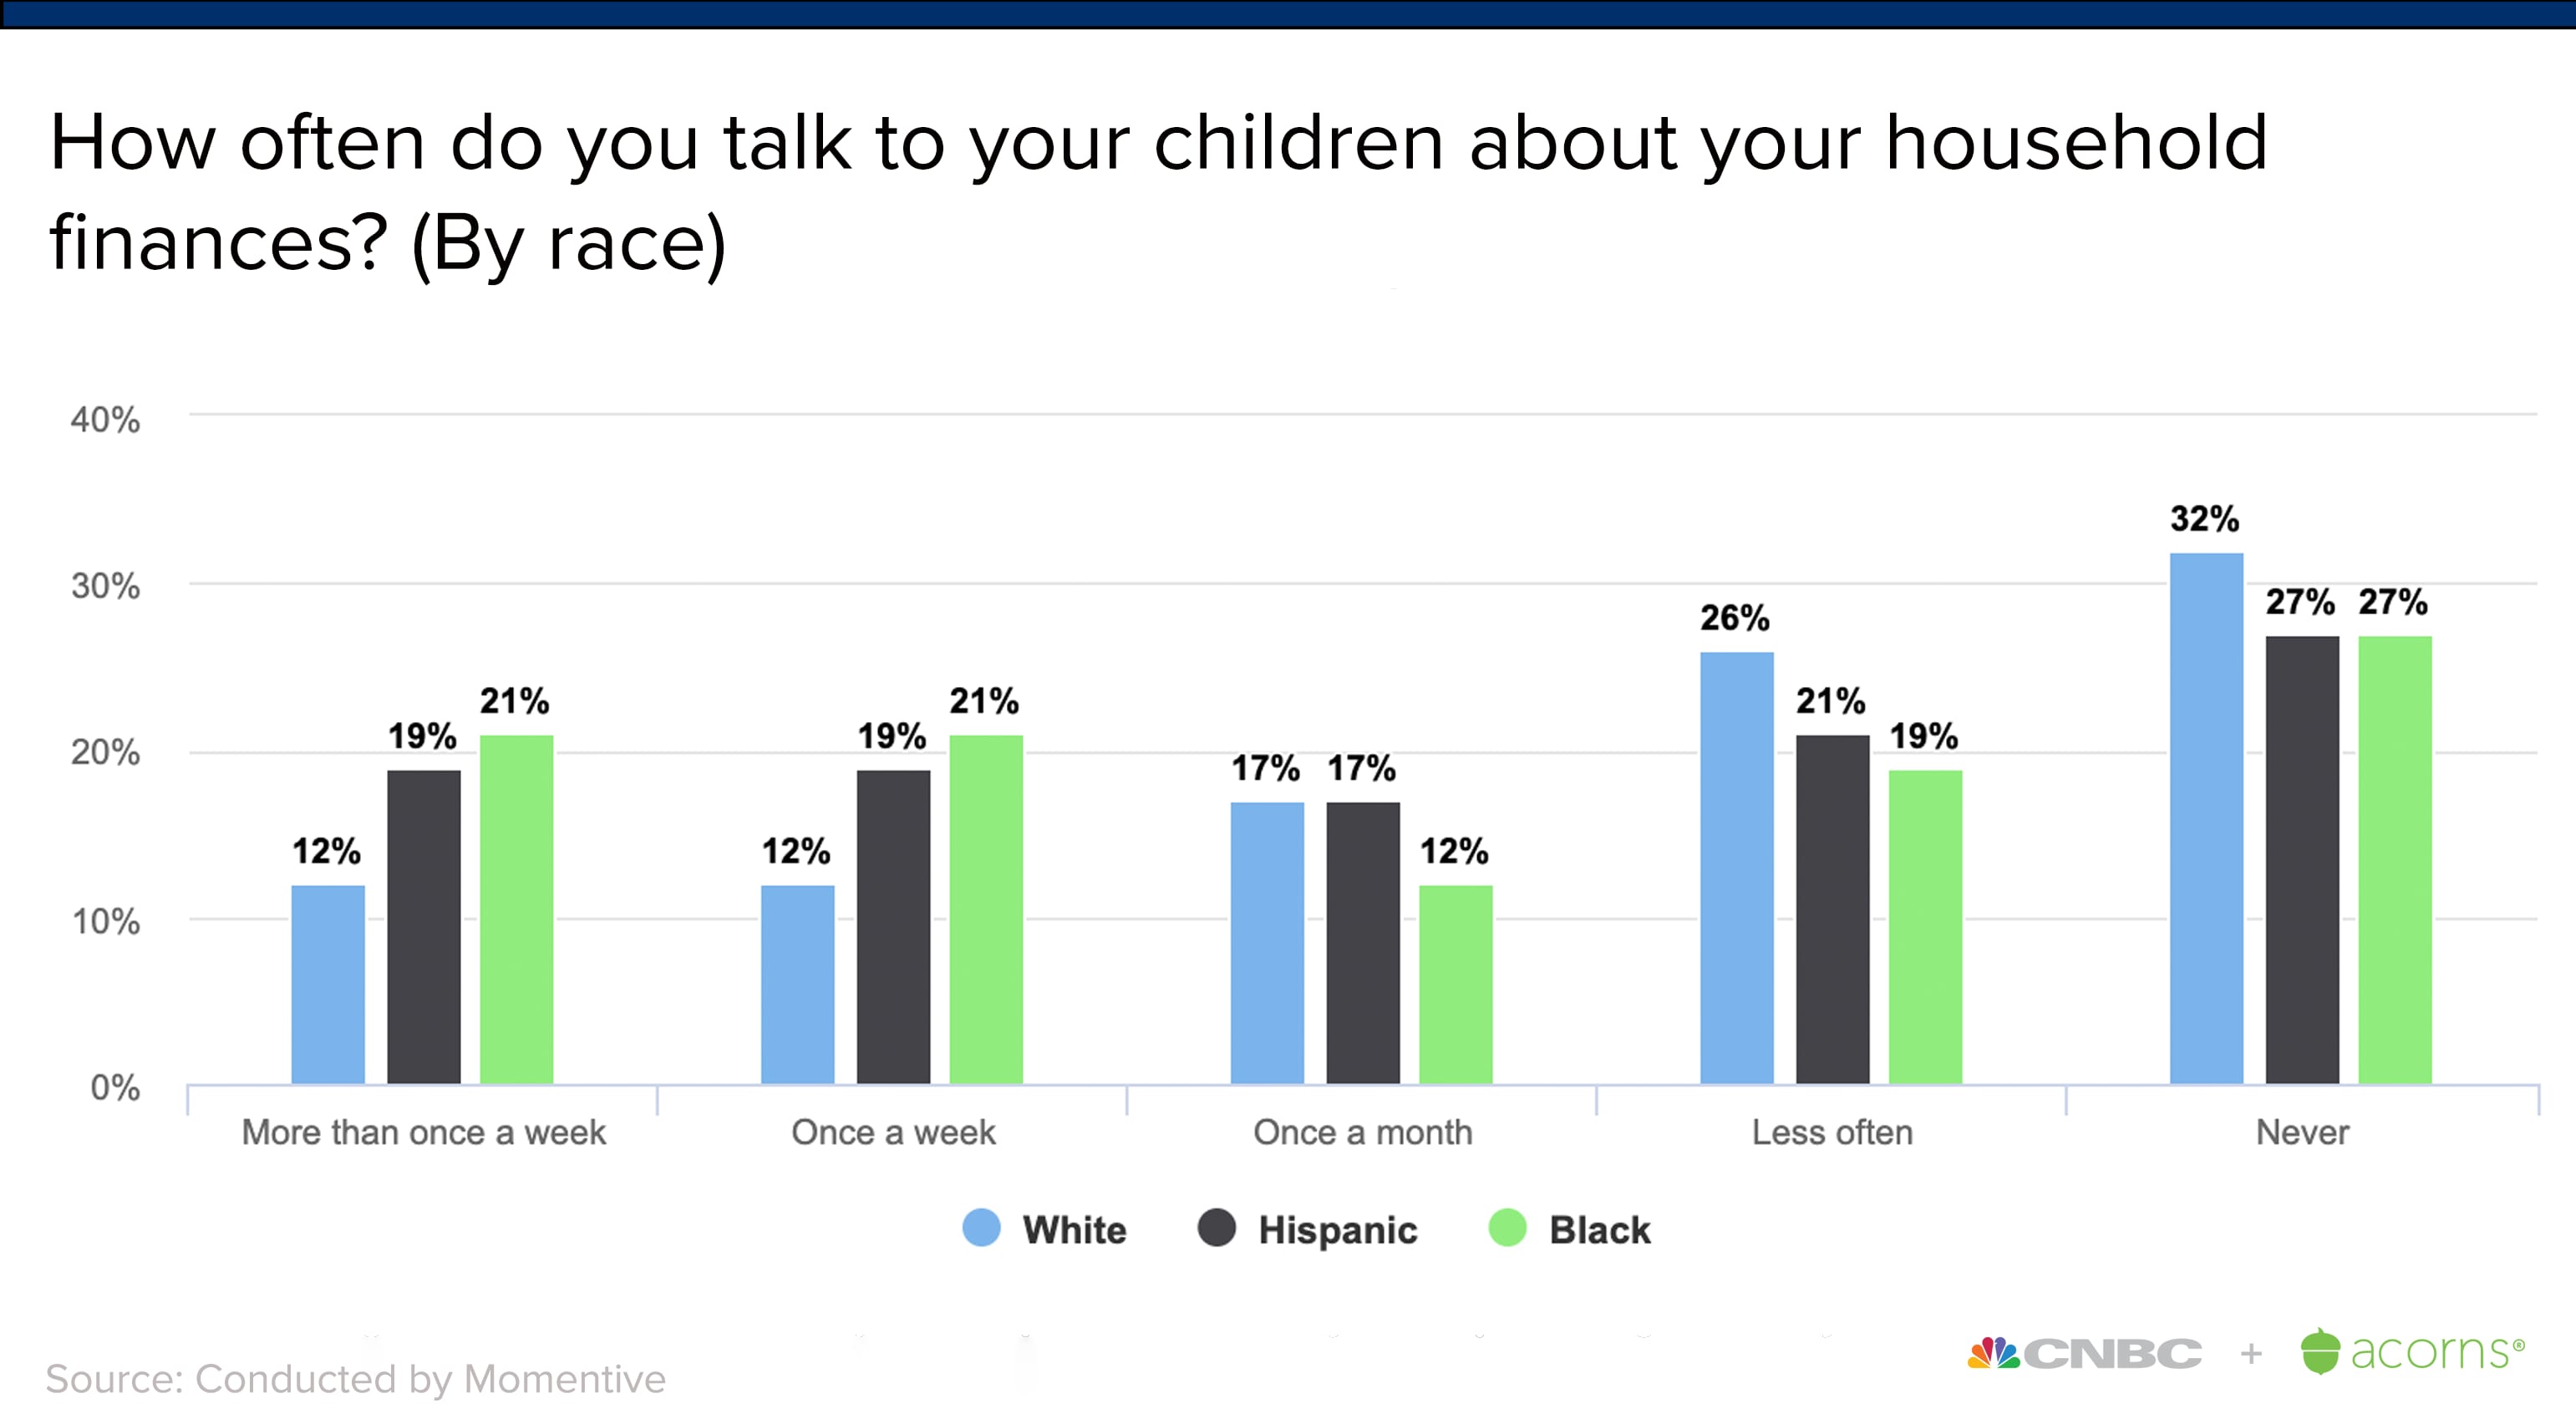 How often do you talk to your children about your household finances? By race